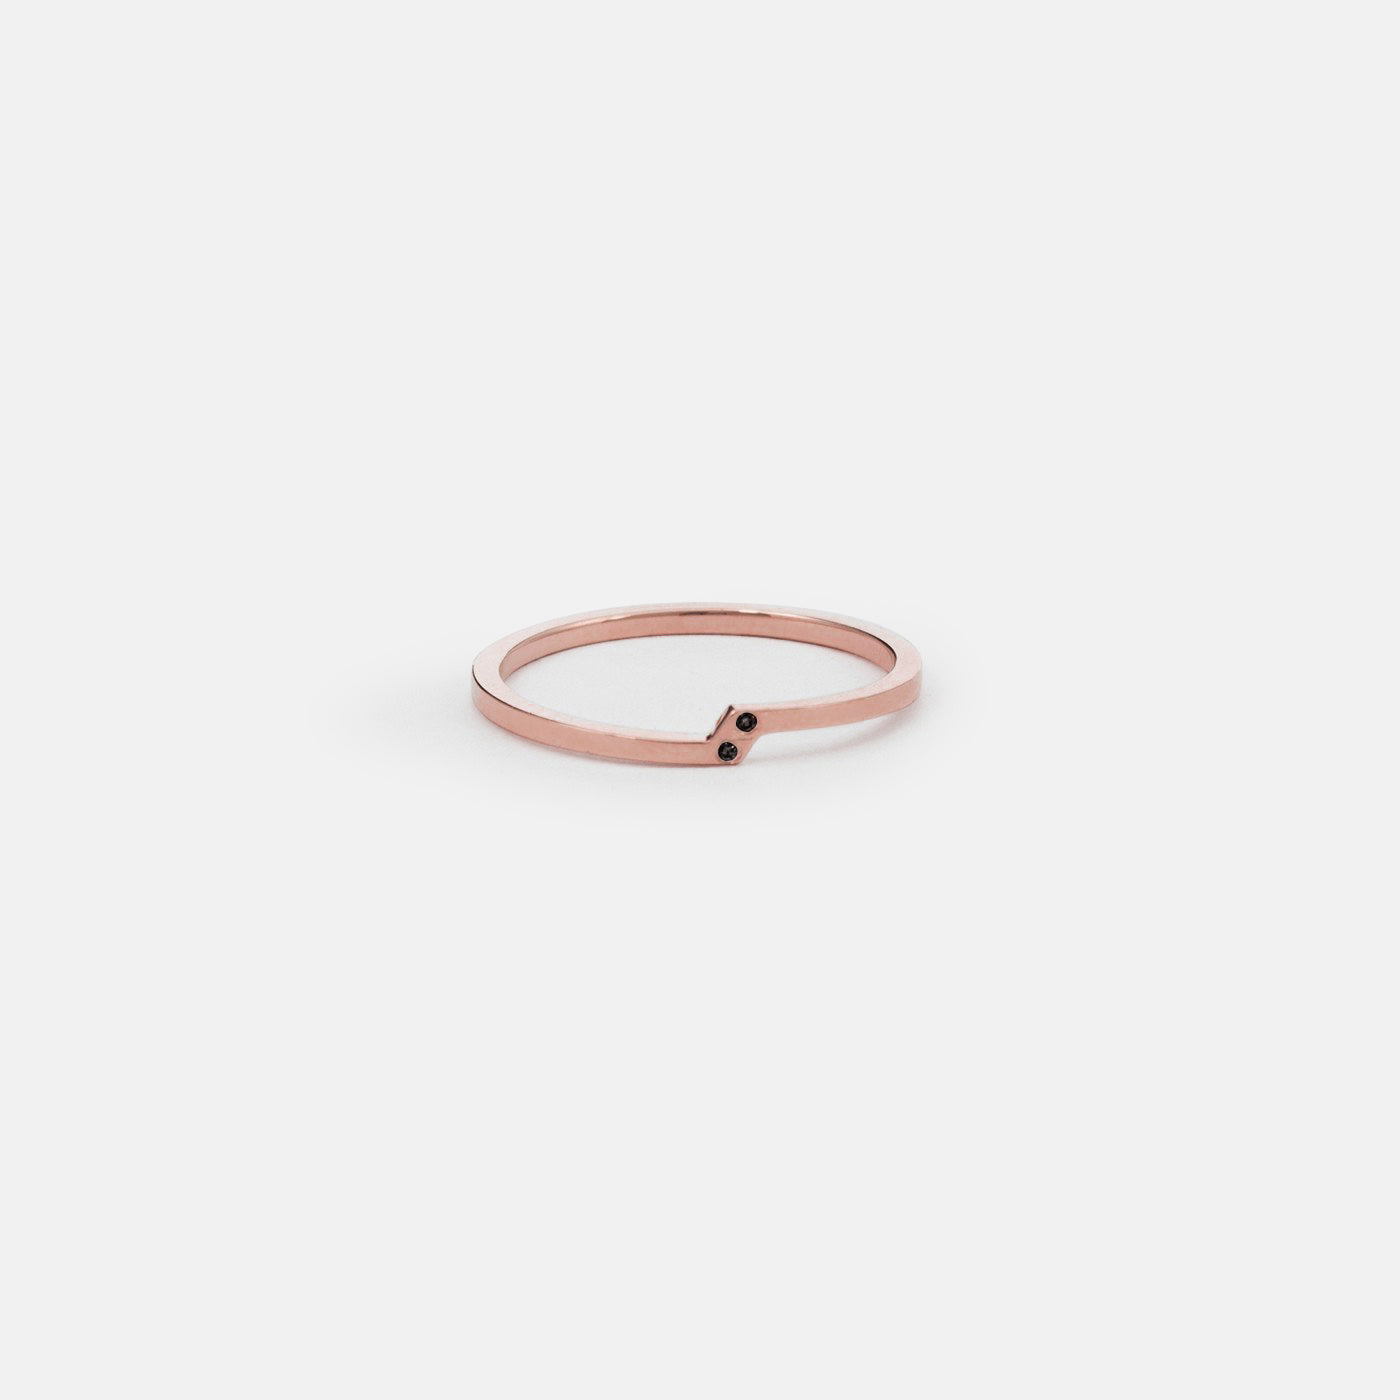 Rili Cool Ring in 14k Rose Gold set with Black Diamonds By SHW Fine Jewelry NYC